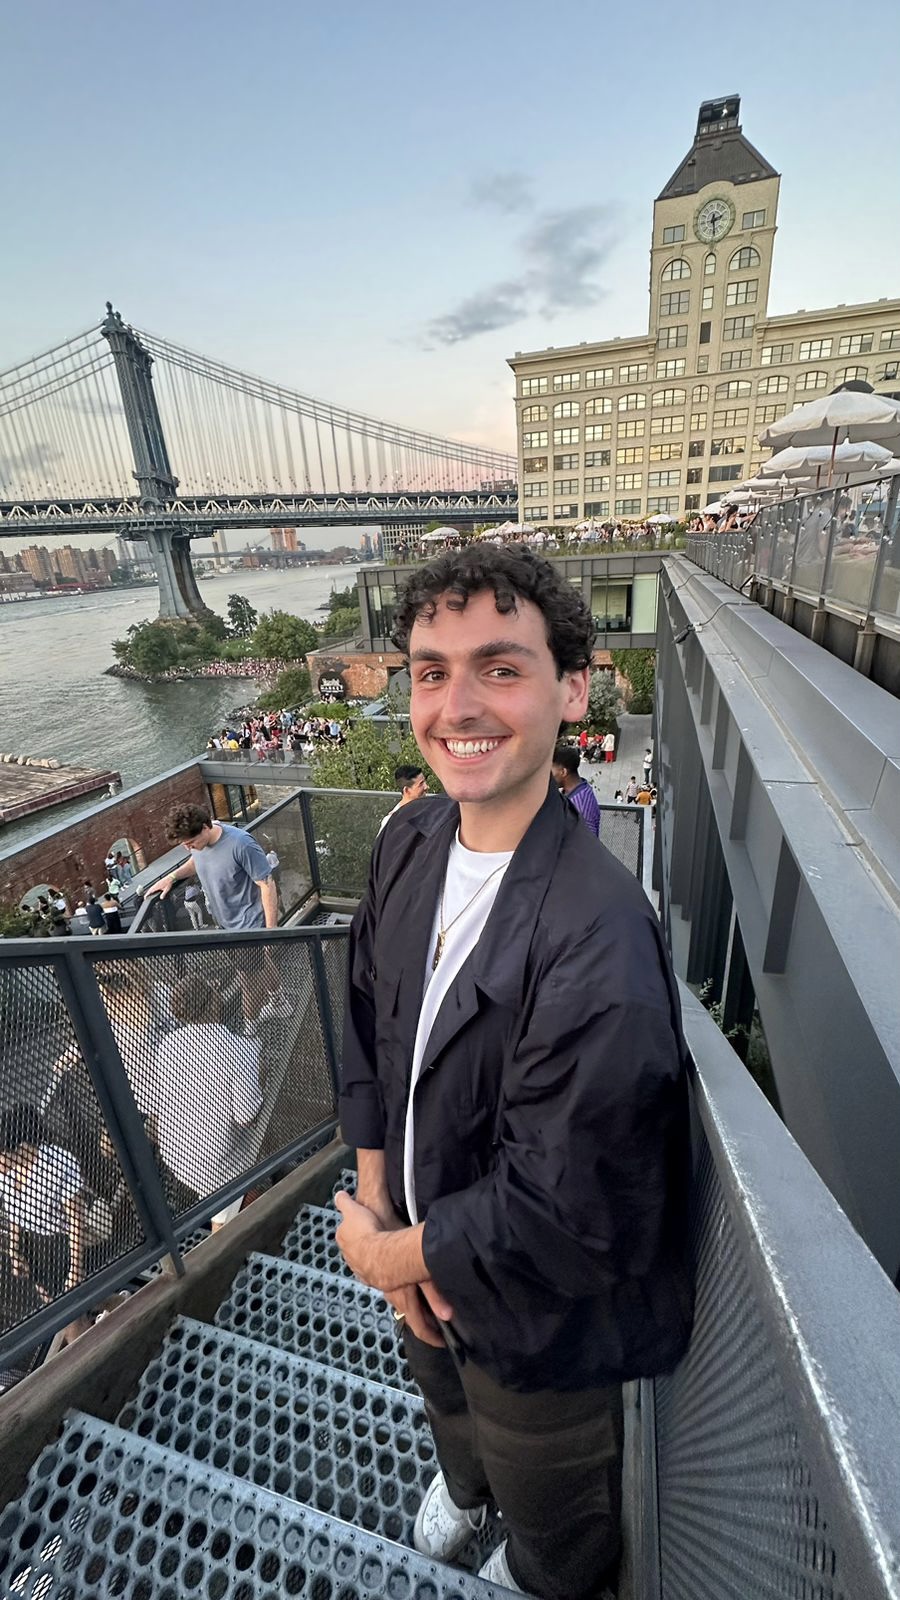 Myself smiling, standing on some stairs with the Brooklyn bridge in the background